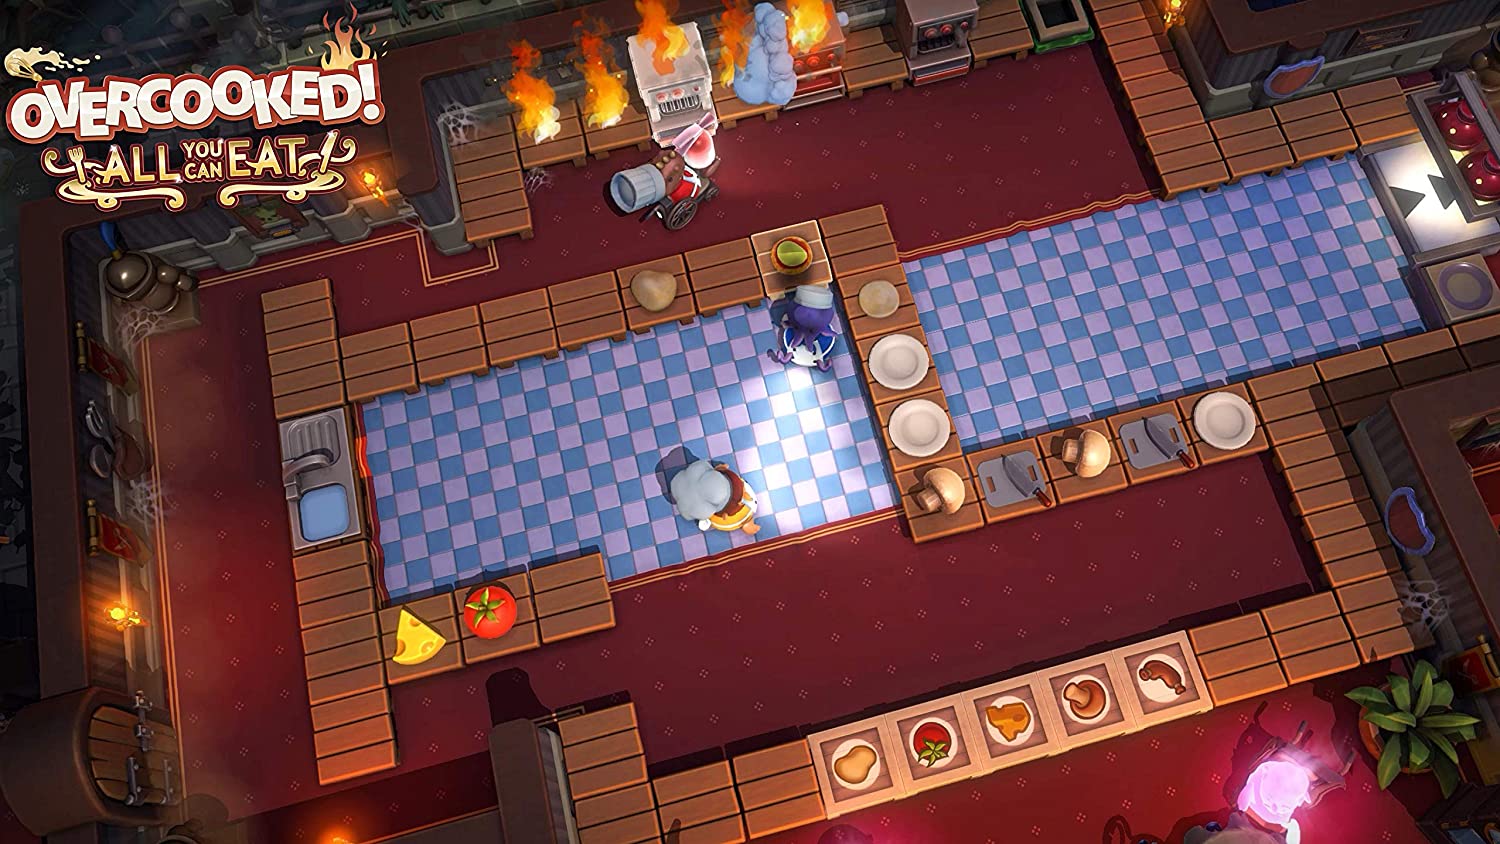 [Nintendo Switch] Overcooked! All You Can Eat